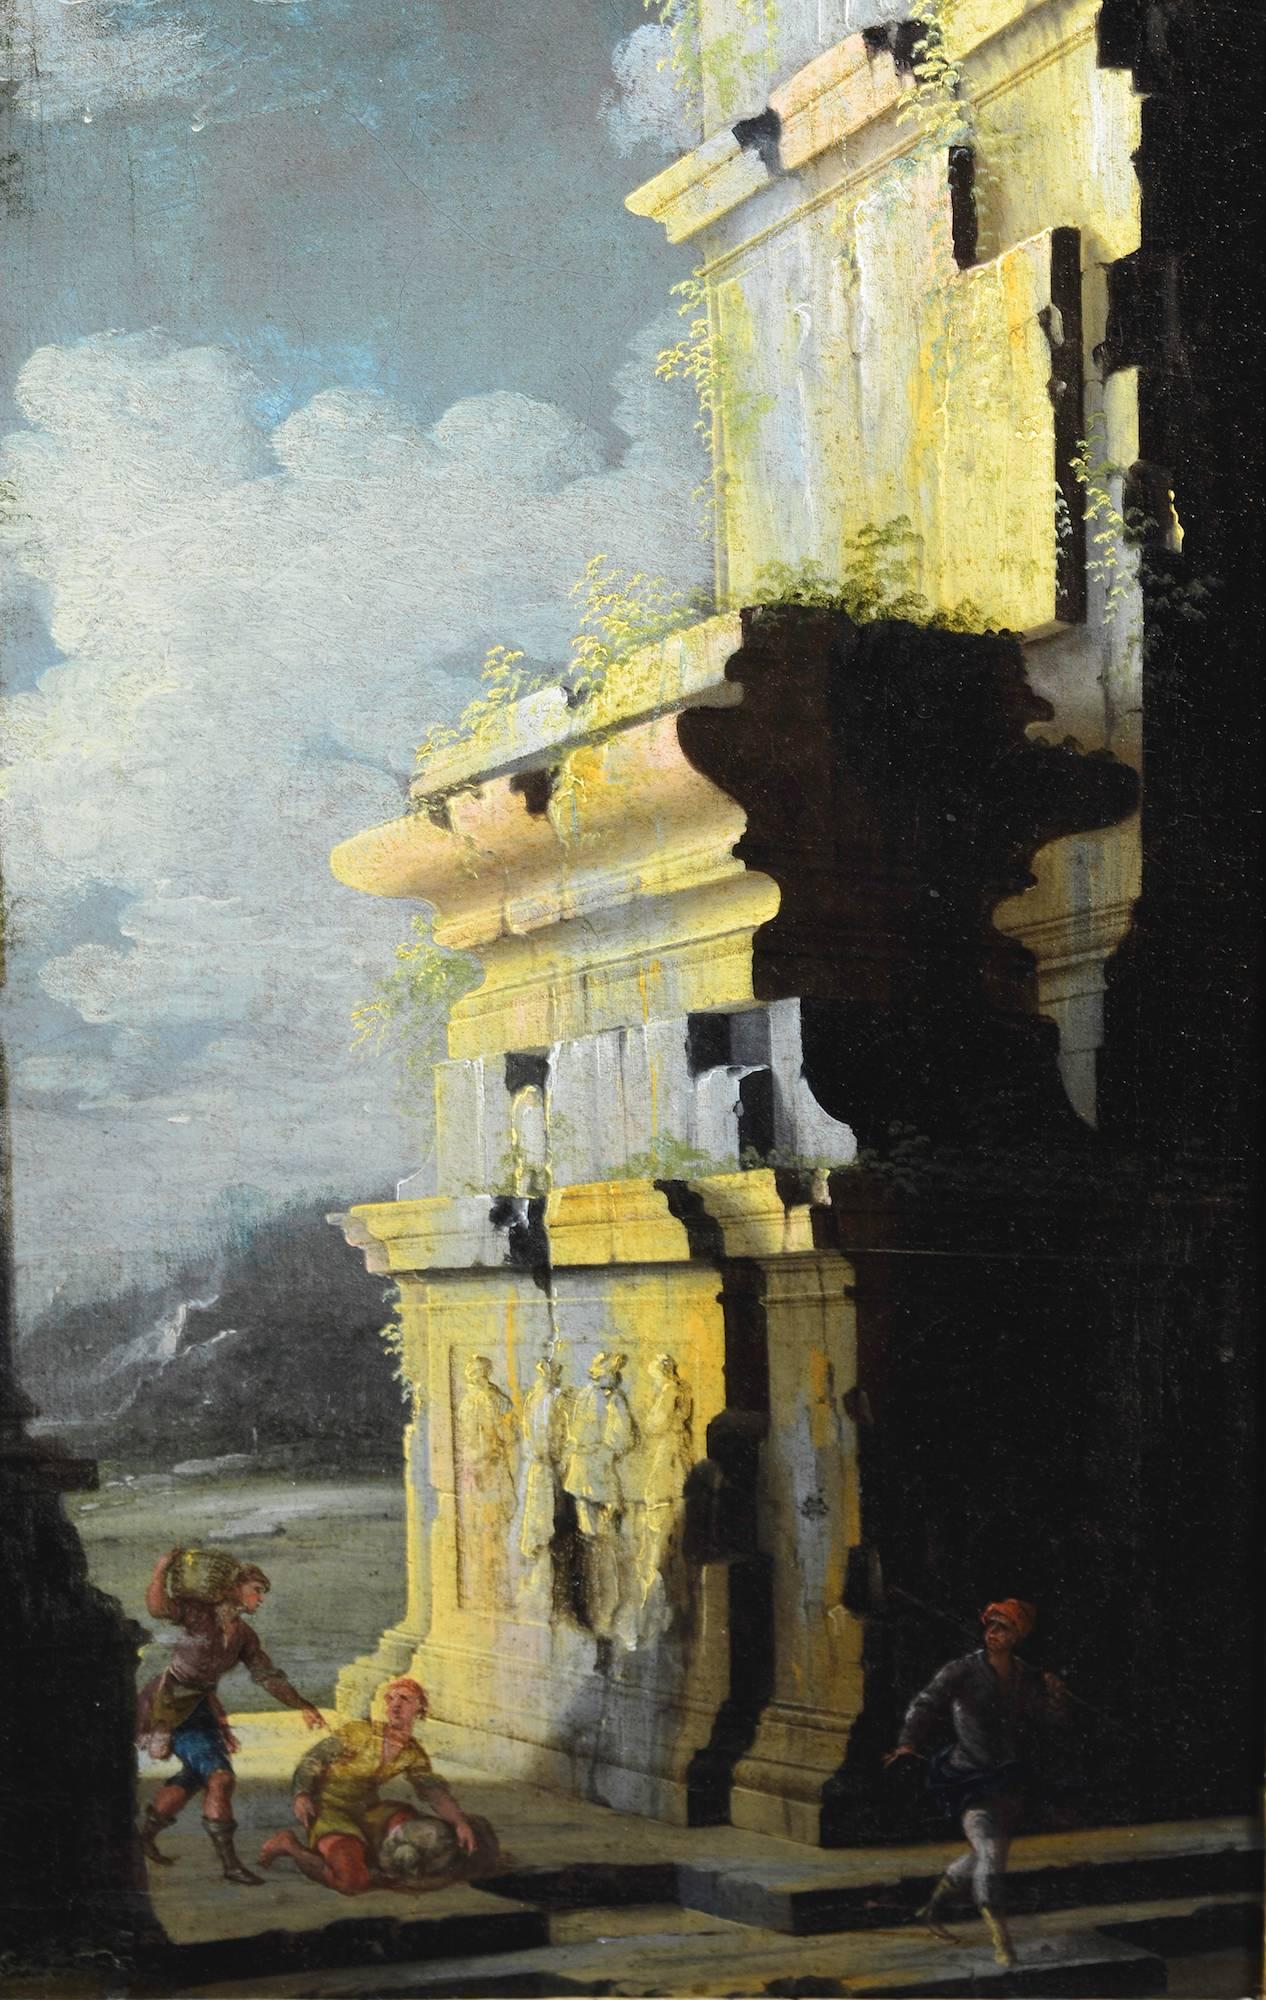 Leonardo Coccorante
Naples 1680 - 1750
Pair of Architectural Capricci with Classical Ruins by the Sea
72 x 48 cm., oil on canvas

Art historian David Marshall has written that 17th century Naples produced two singularly talented painters, the